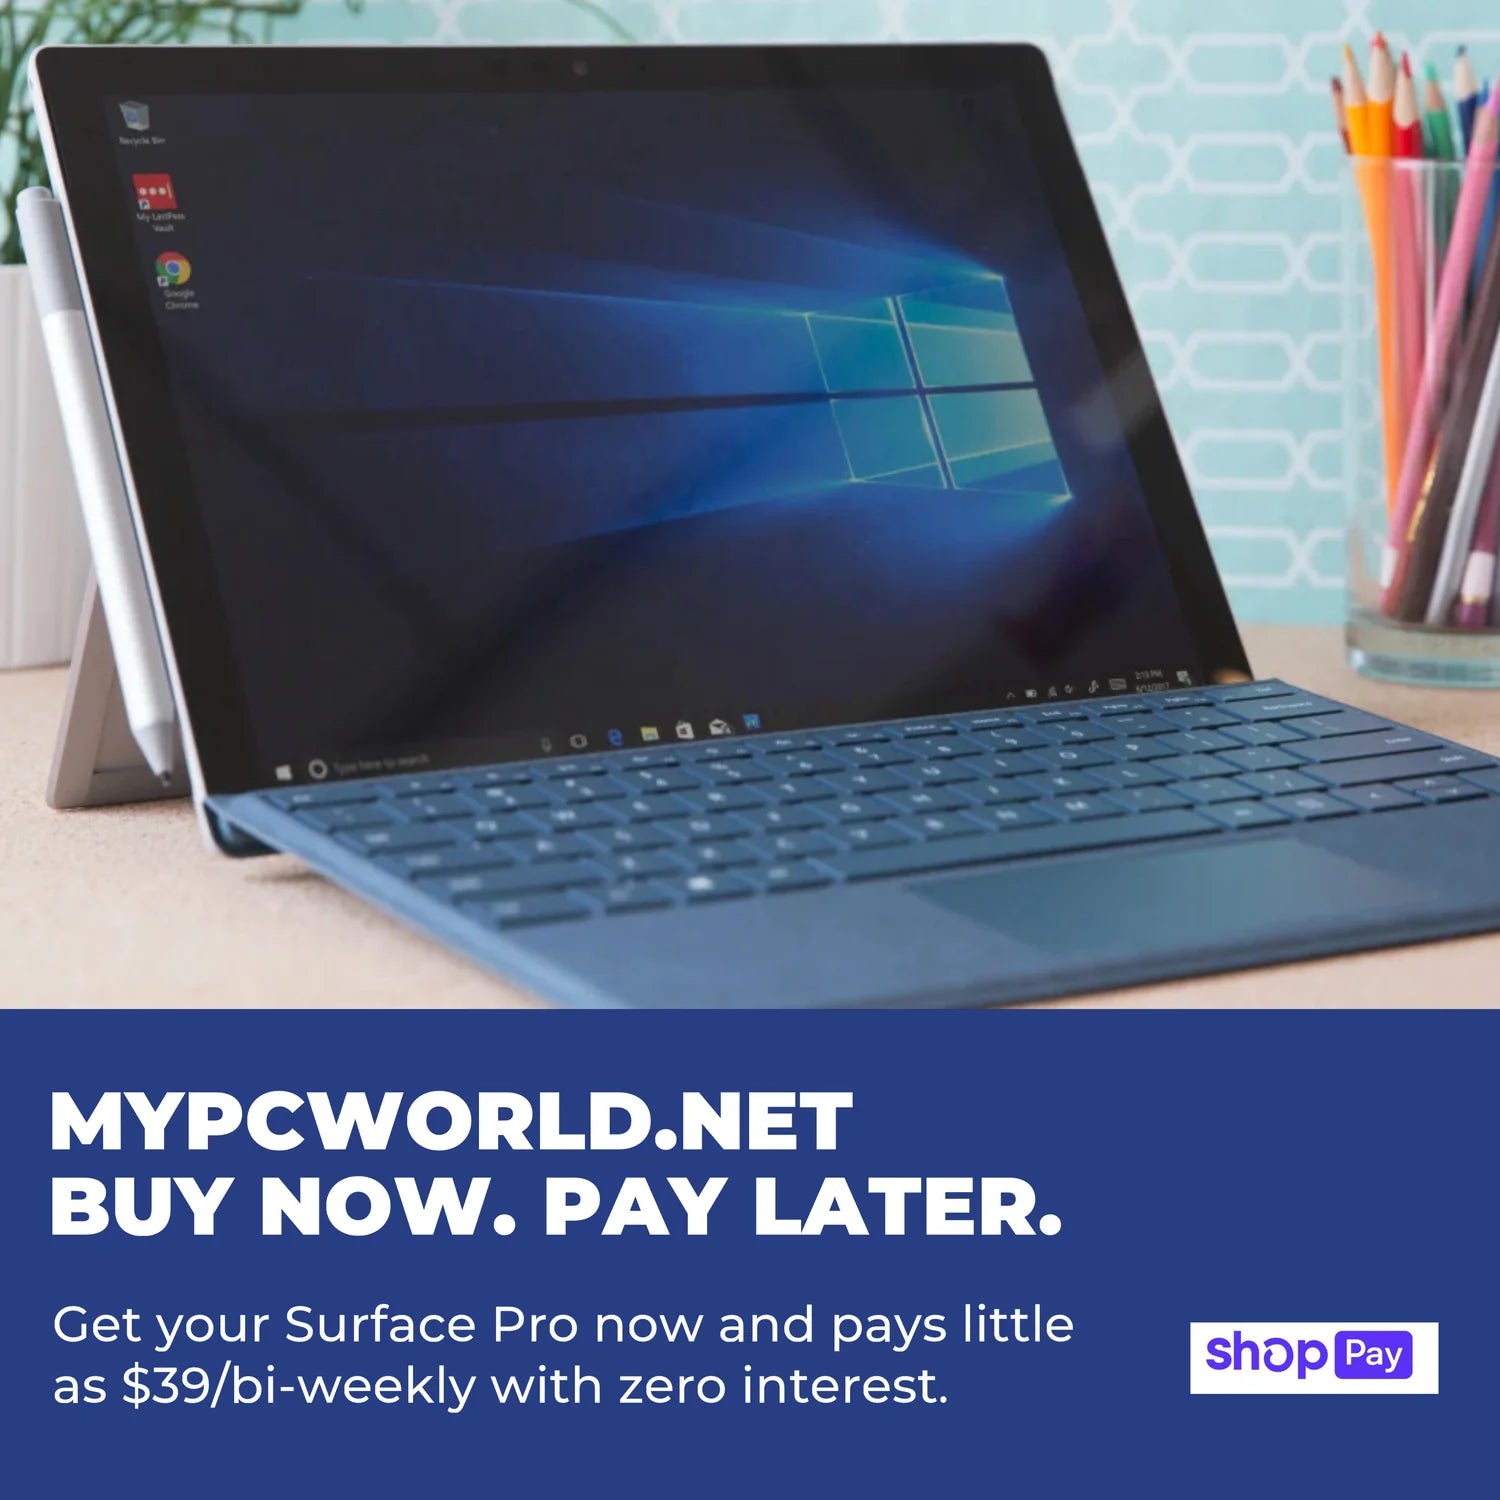 MYPCWORLD.NET - Buy Now. Pay later. Program now available